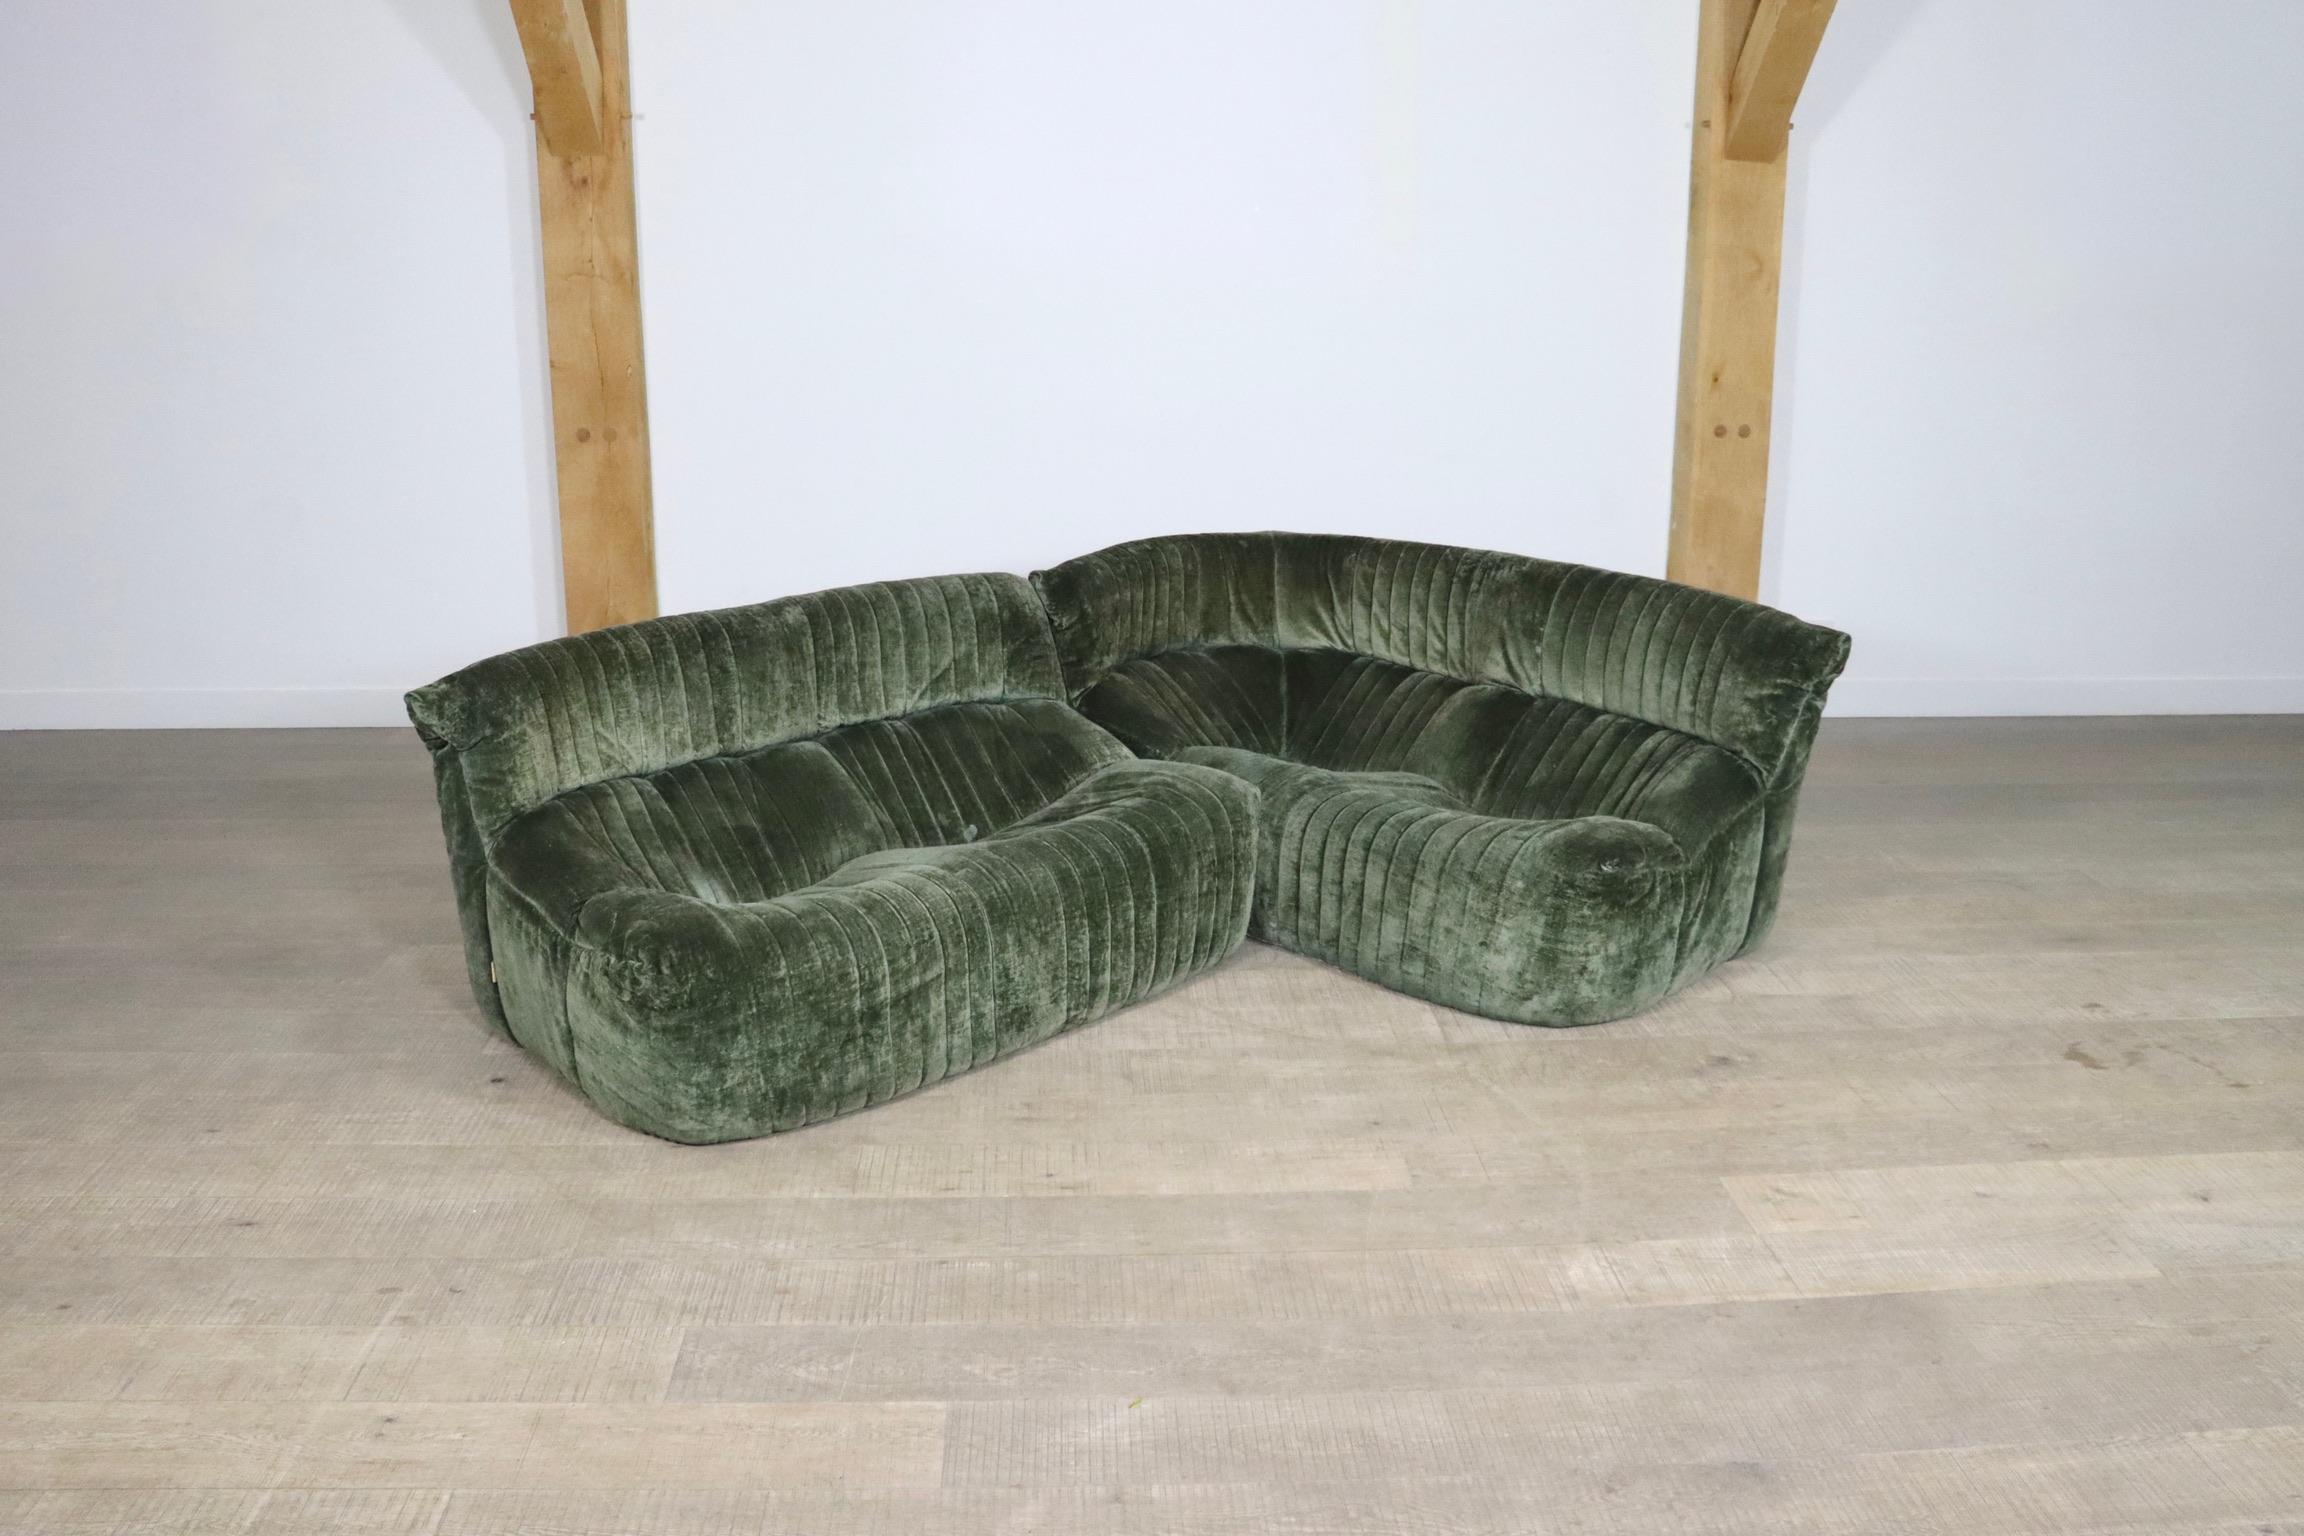 Rare vintage Aralia two seater sofa, and two seater corner sofa in original green velvet by Michel Ducaroy for Ligne Roset in the 1970s. The stunning original green velvet upholstery combines perfectly with the unique design. Comfortable and